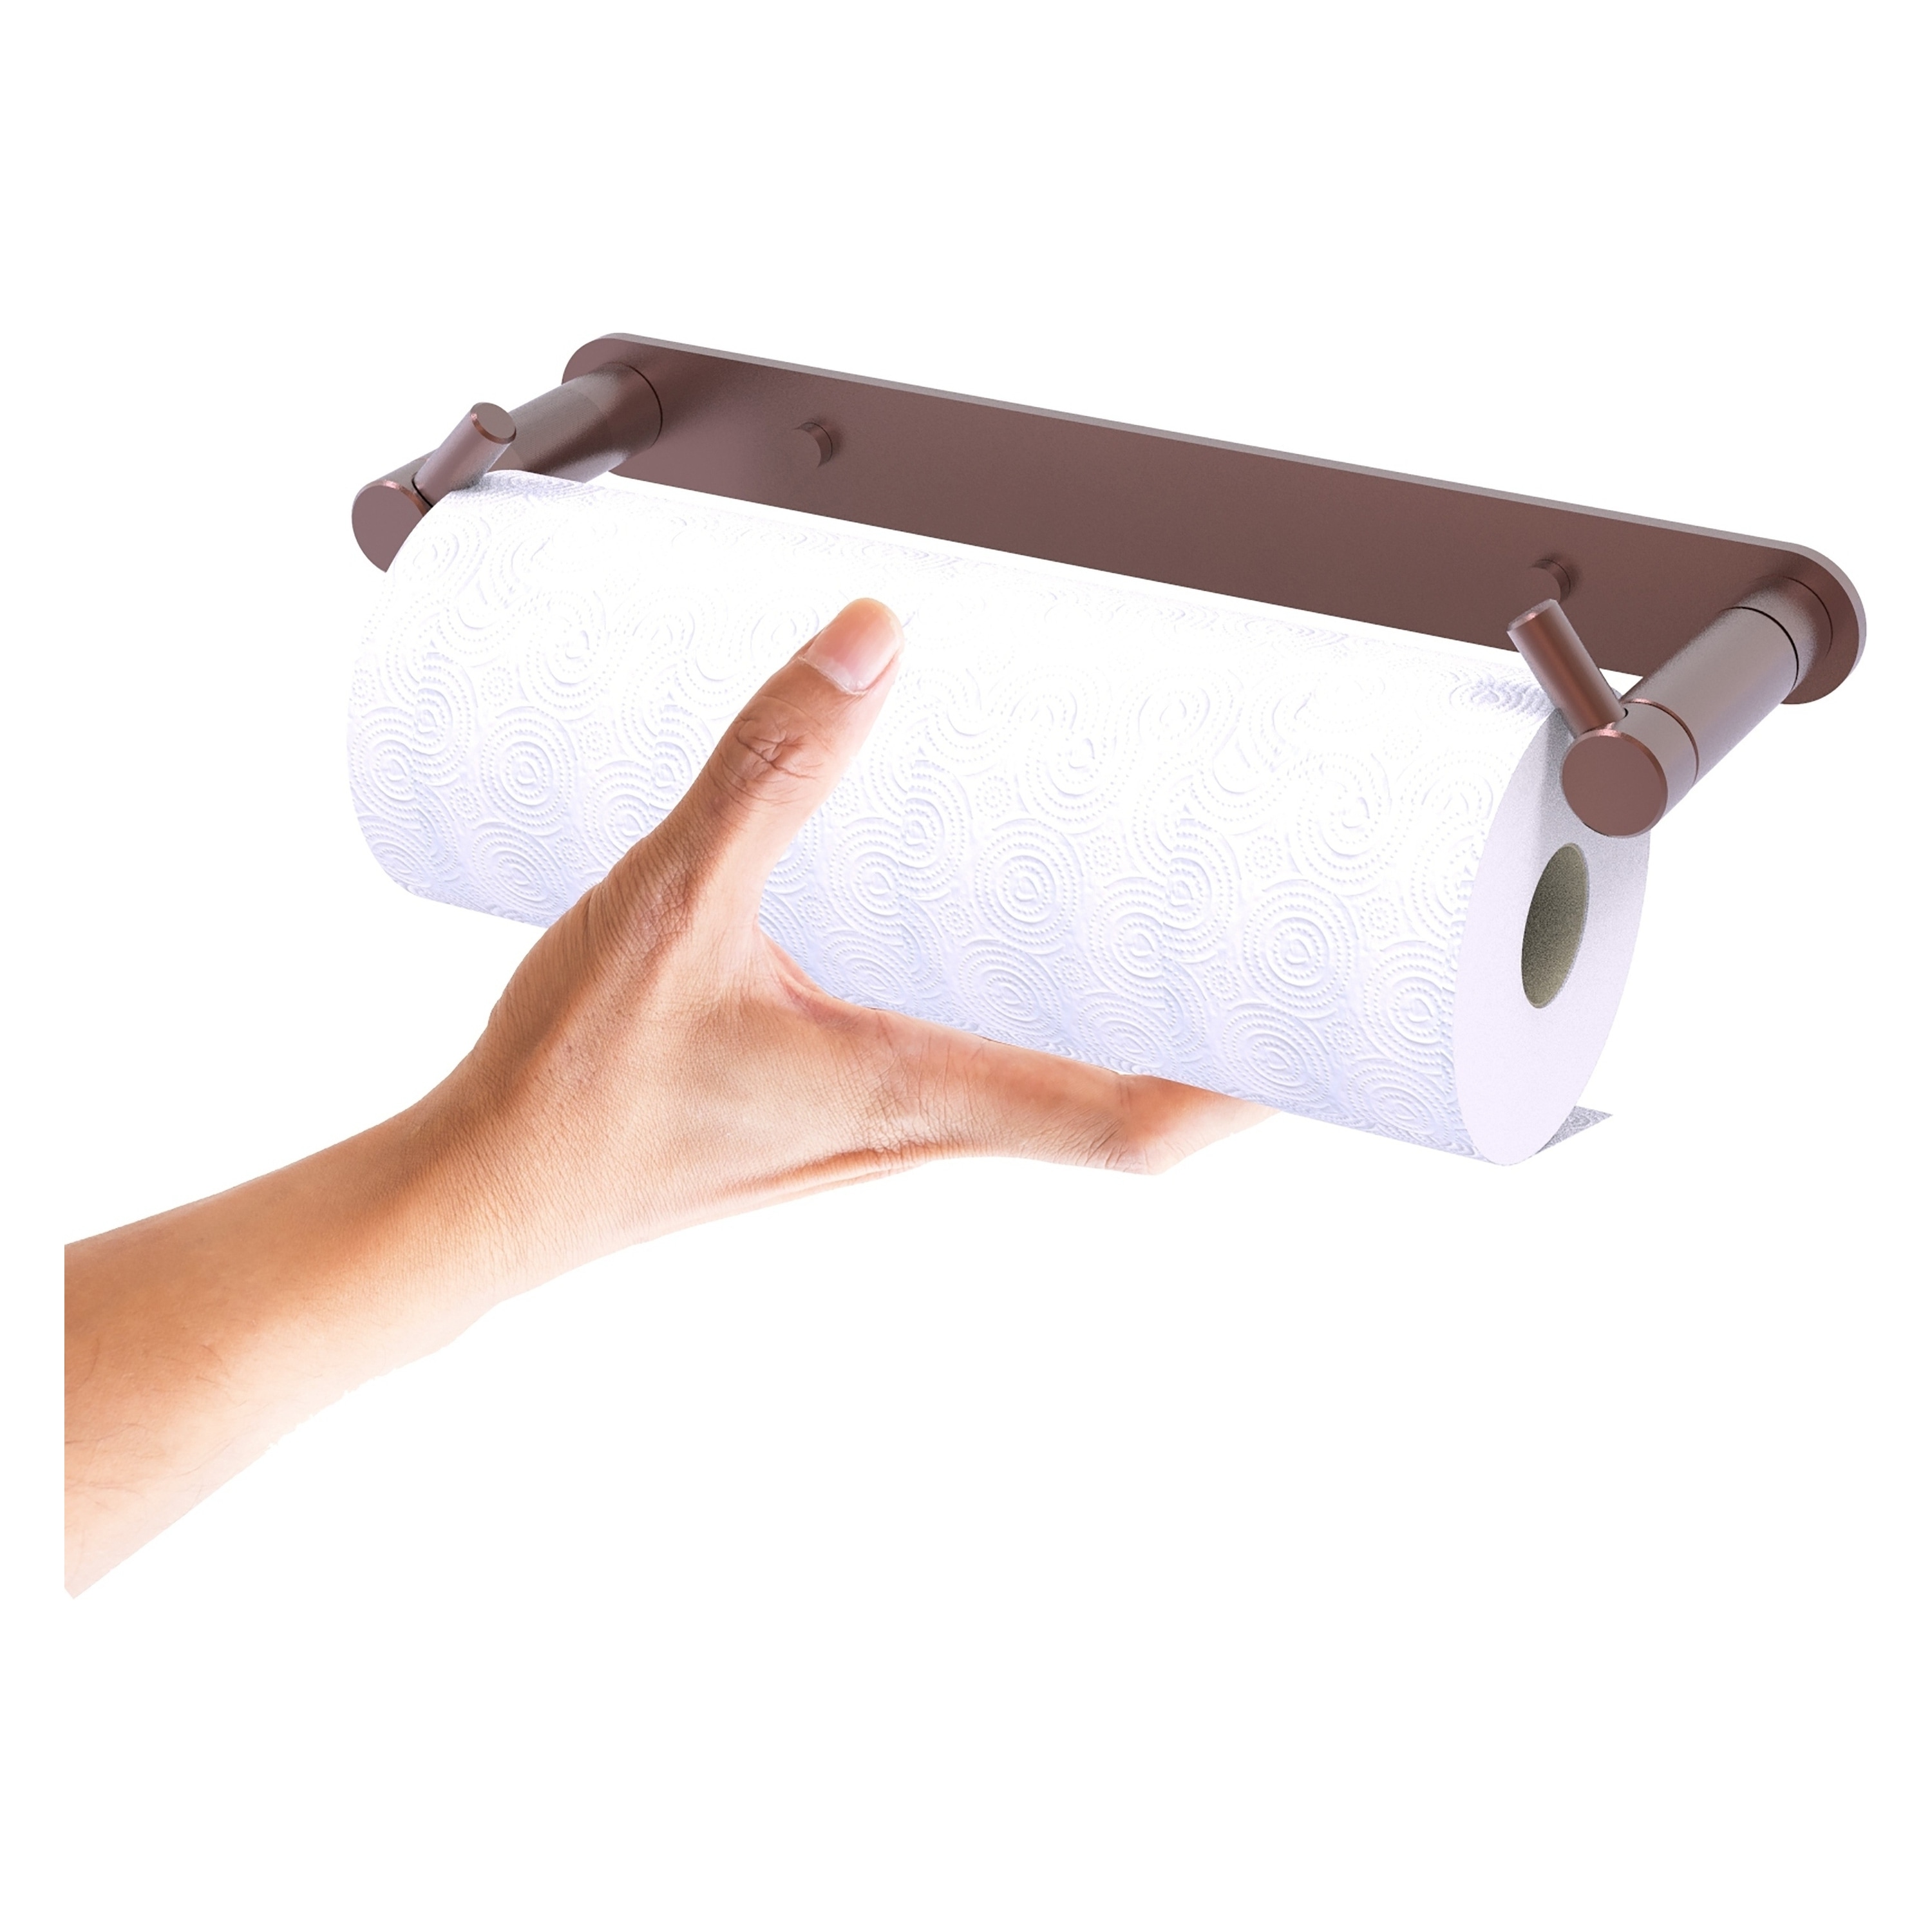 Basicwise Black Metal Undercabinet Paper Towel Holder in the Paper